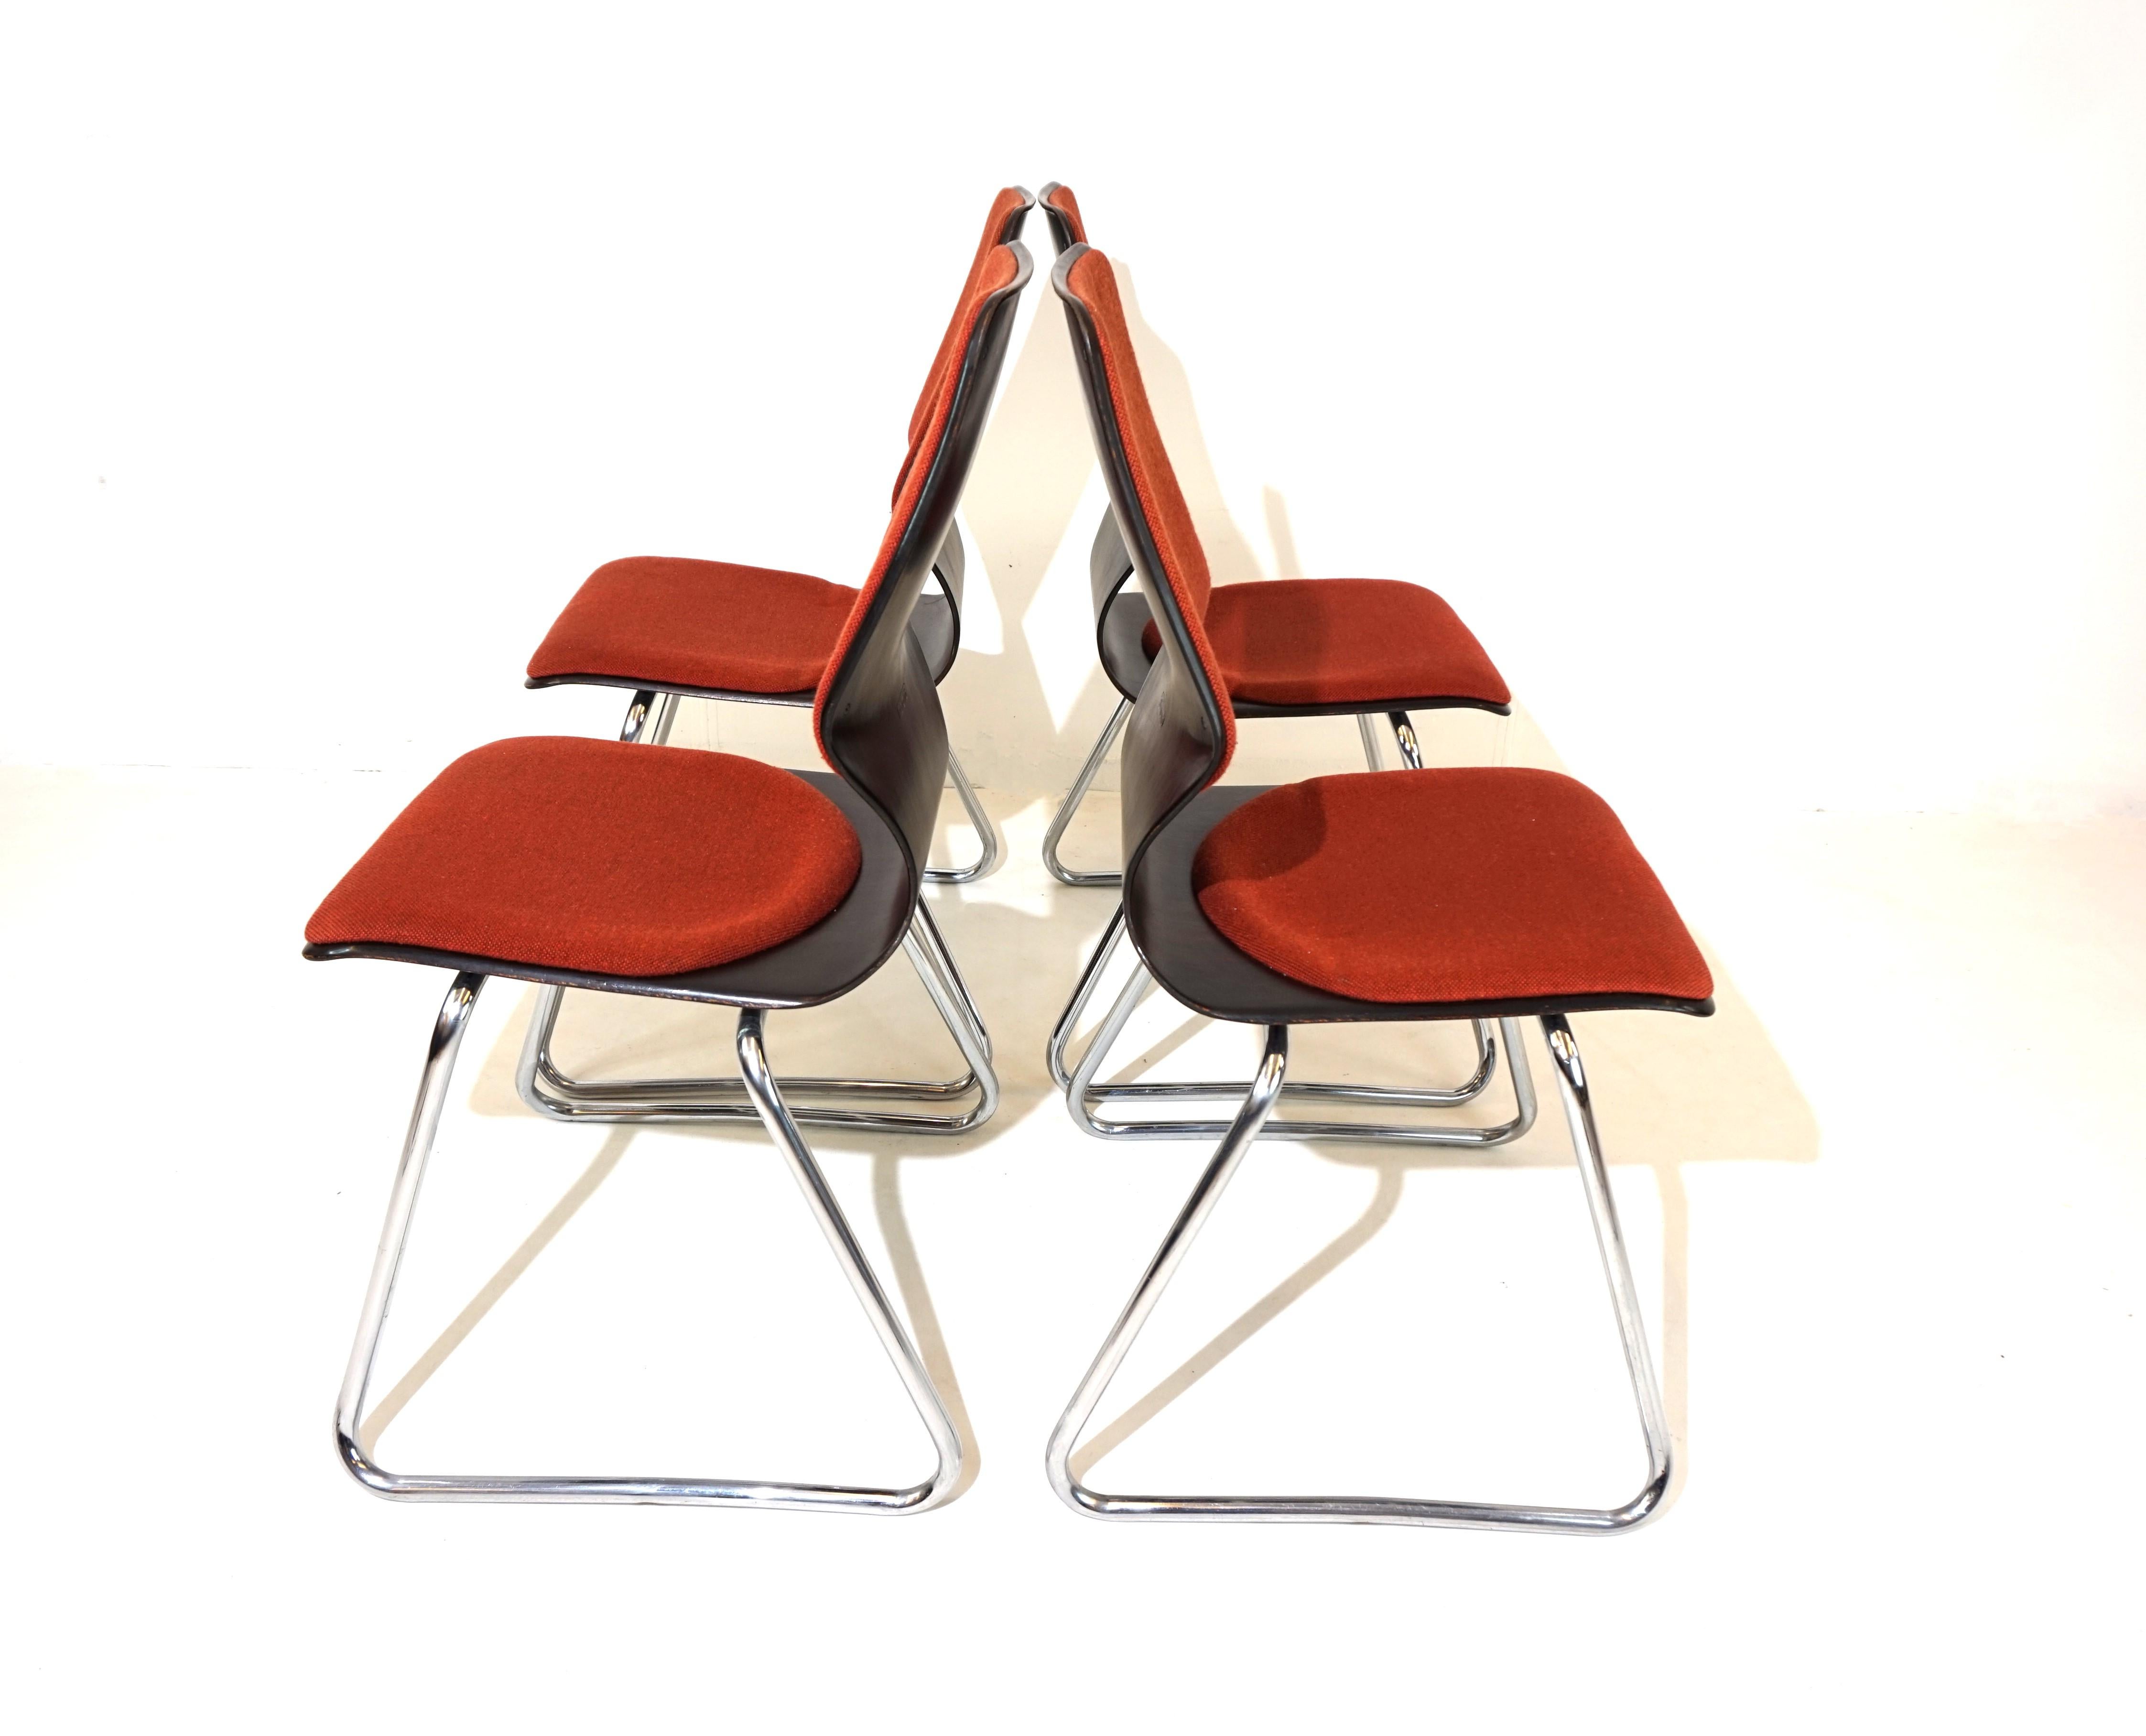 Flötotto set of 4 Pagholz chairs by Elmar Flötotto For Sale 4